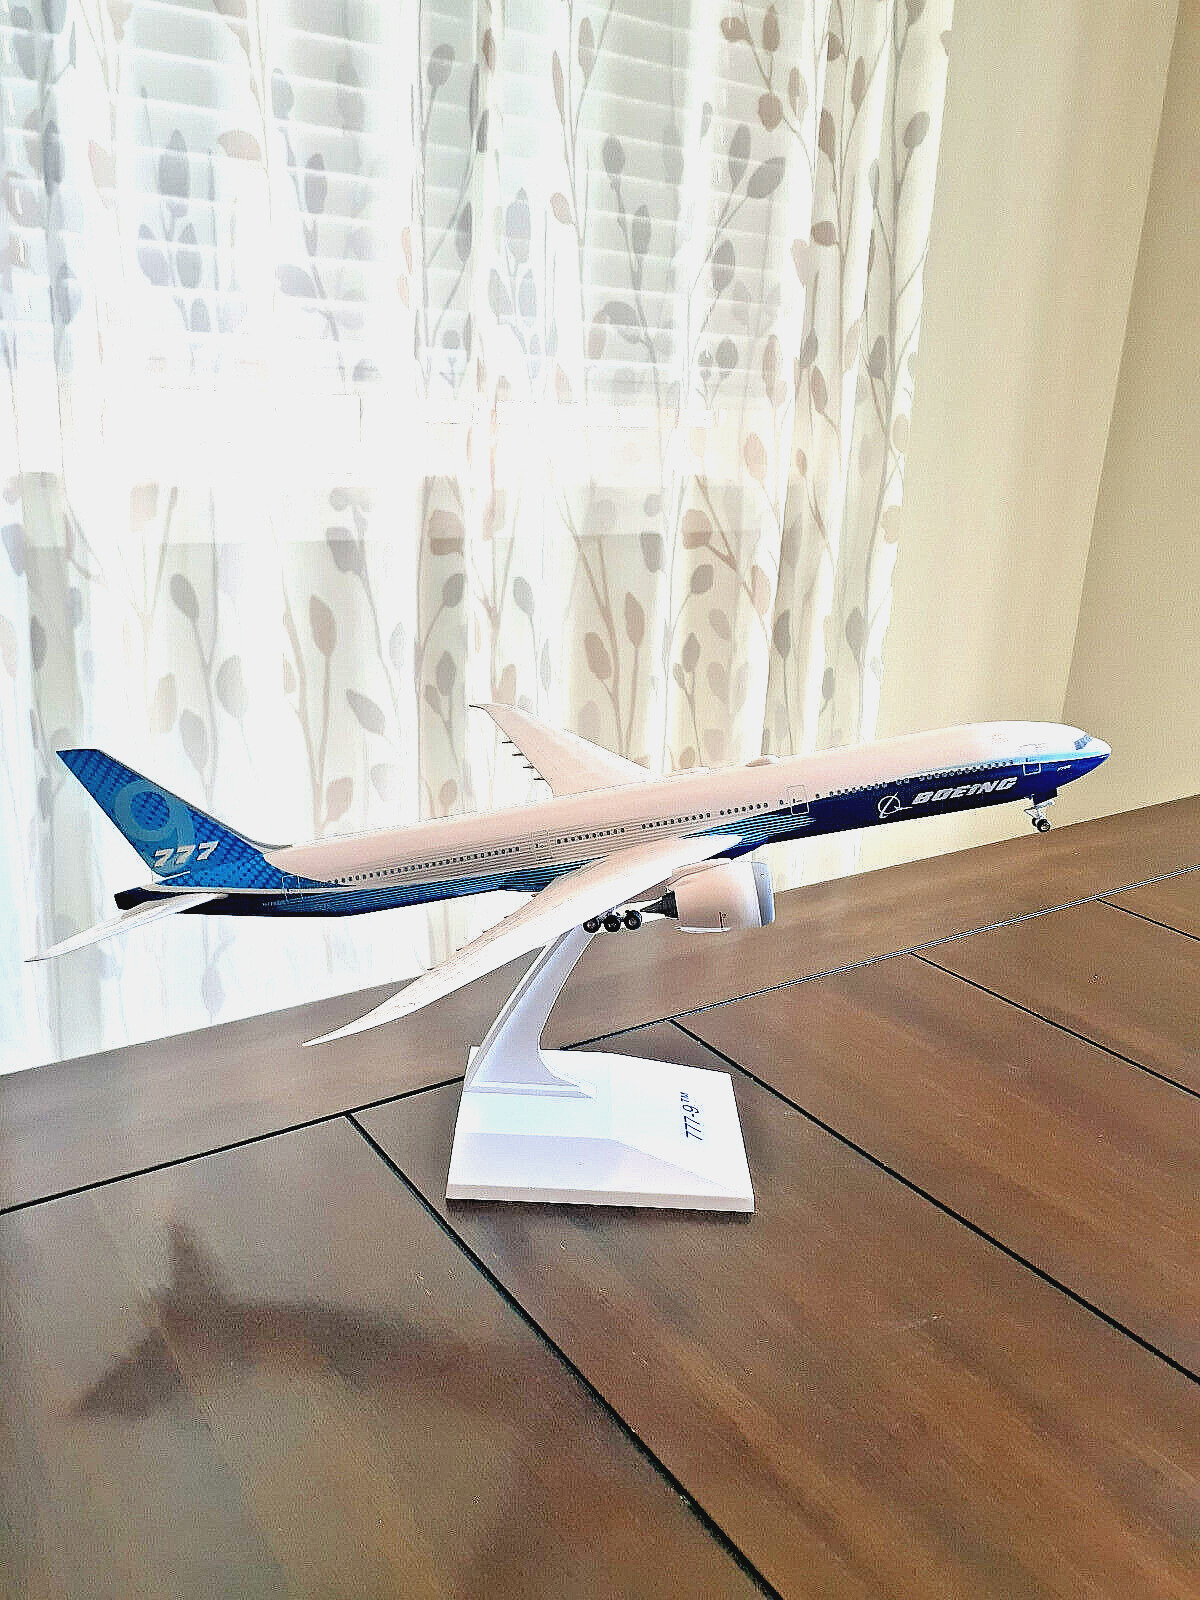 Hogan Boeing 777-9 777X House Color Desk Display Model 1/200 A/P NEW IN THE BOX